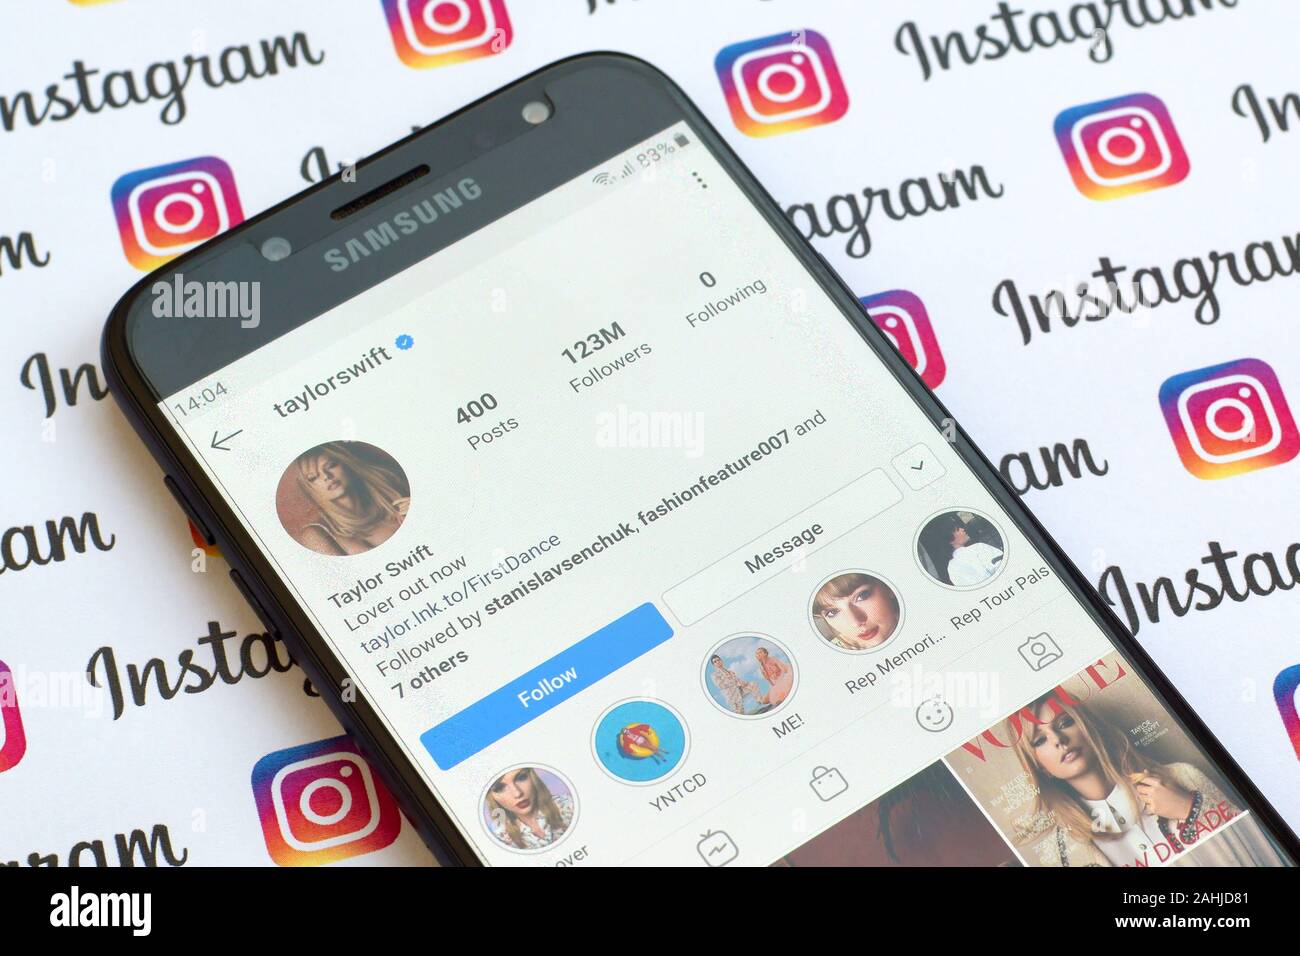 NY, USA - DECEMBER 4, 2019: Taylor Swift official instagram account on smartphone screen on paper instagram banner. Stock Photo